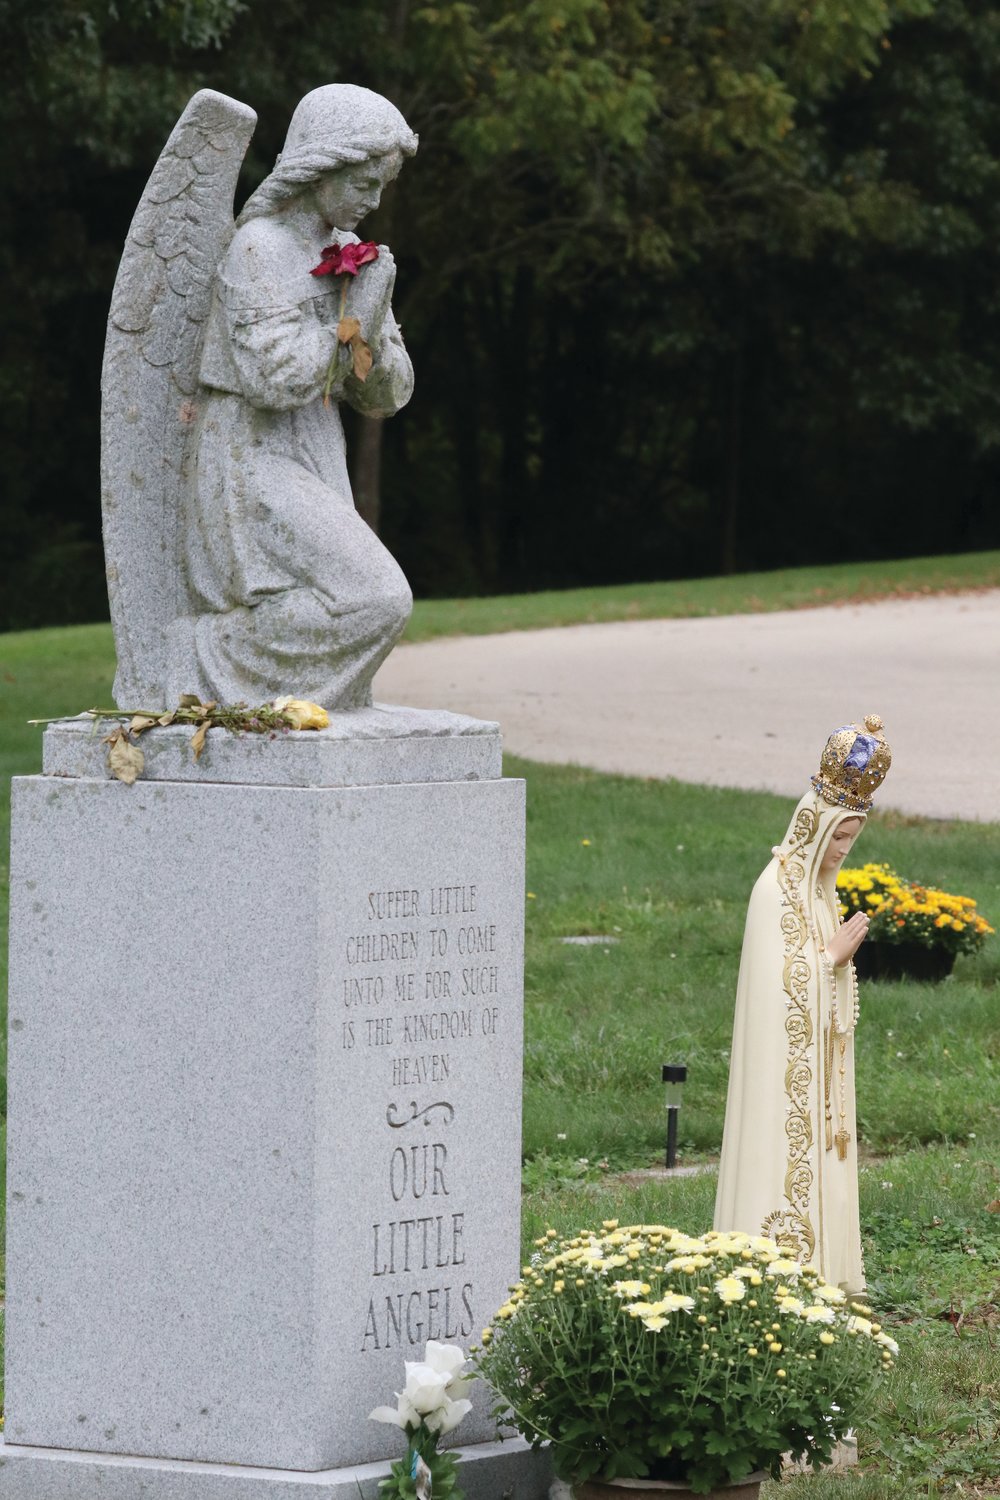 The National Day of Remembrance for aborted children, and for all babies who have died due to miscarriage, stillbirth or illness, took place on Saturday, Sept. 18, at the Gate of Heaven Cemetery, Guardian Angel Statue burial site.